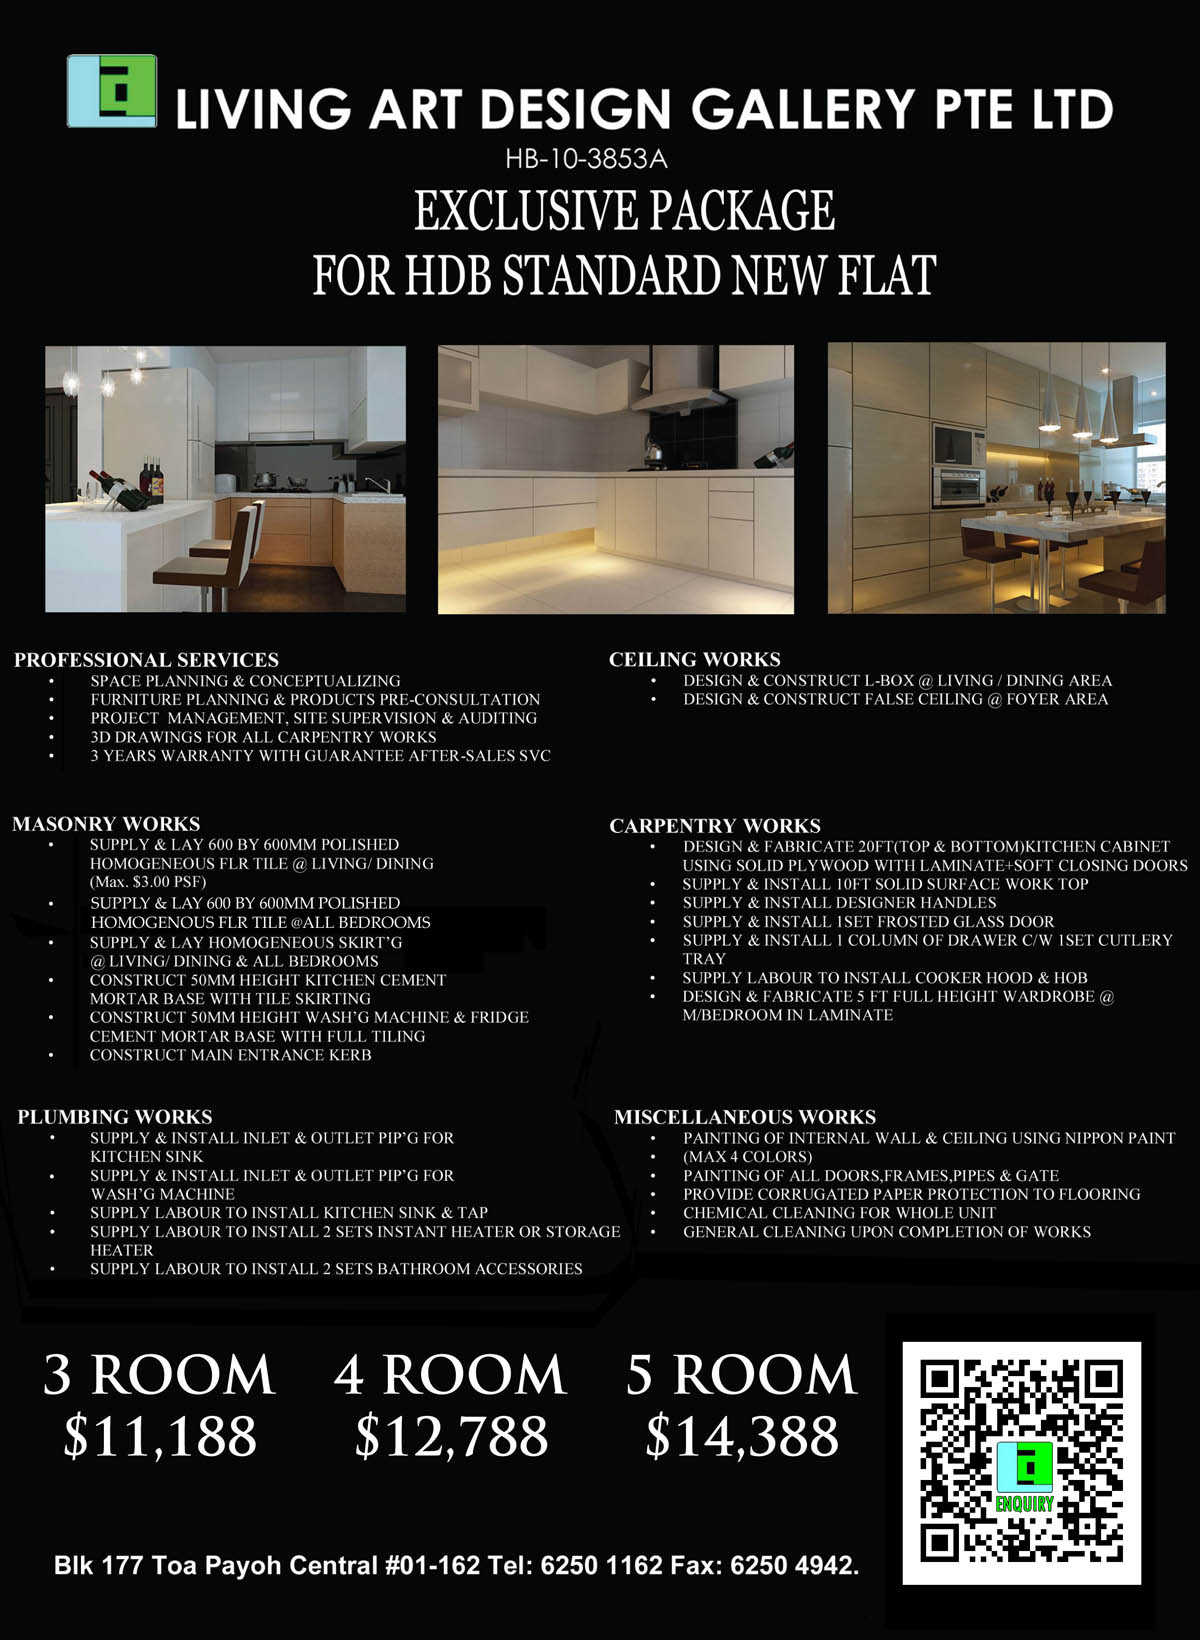 Package 2: HDB Standard Exclusive Package for HDB Standard New Flat $11,188